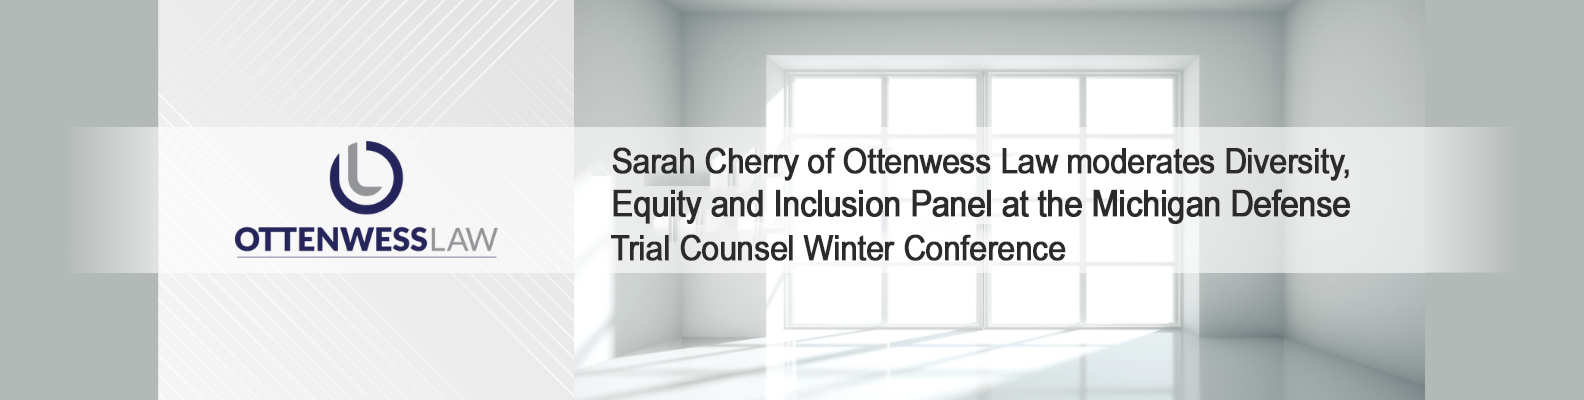 Sarah Cherry of Ottenwess Law moderates Diversity, Equity and Inclusion Panel at the Michigan Defense Trial Counsel Winter Conference